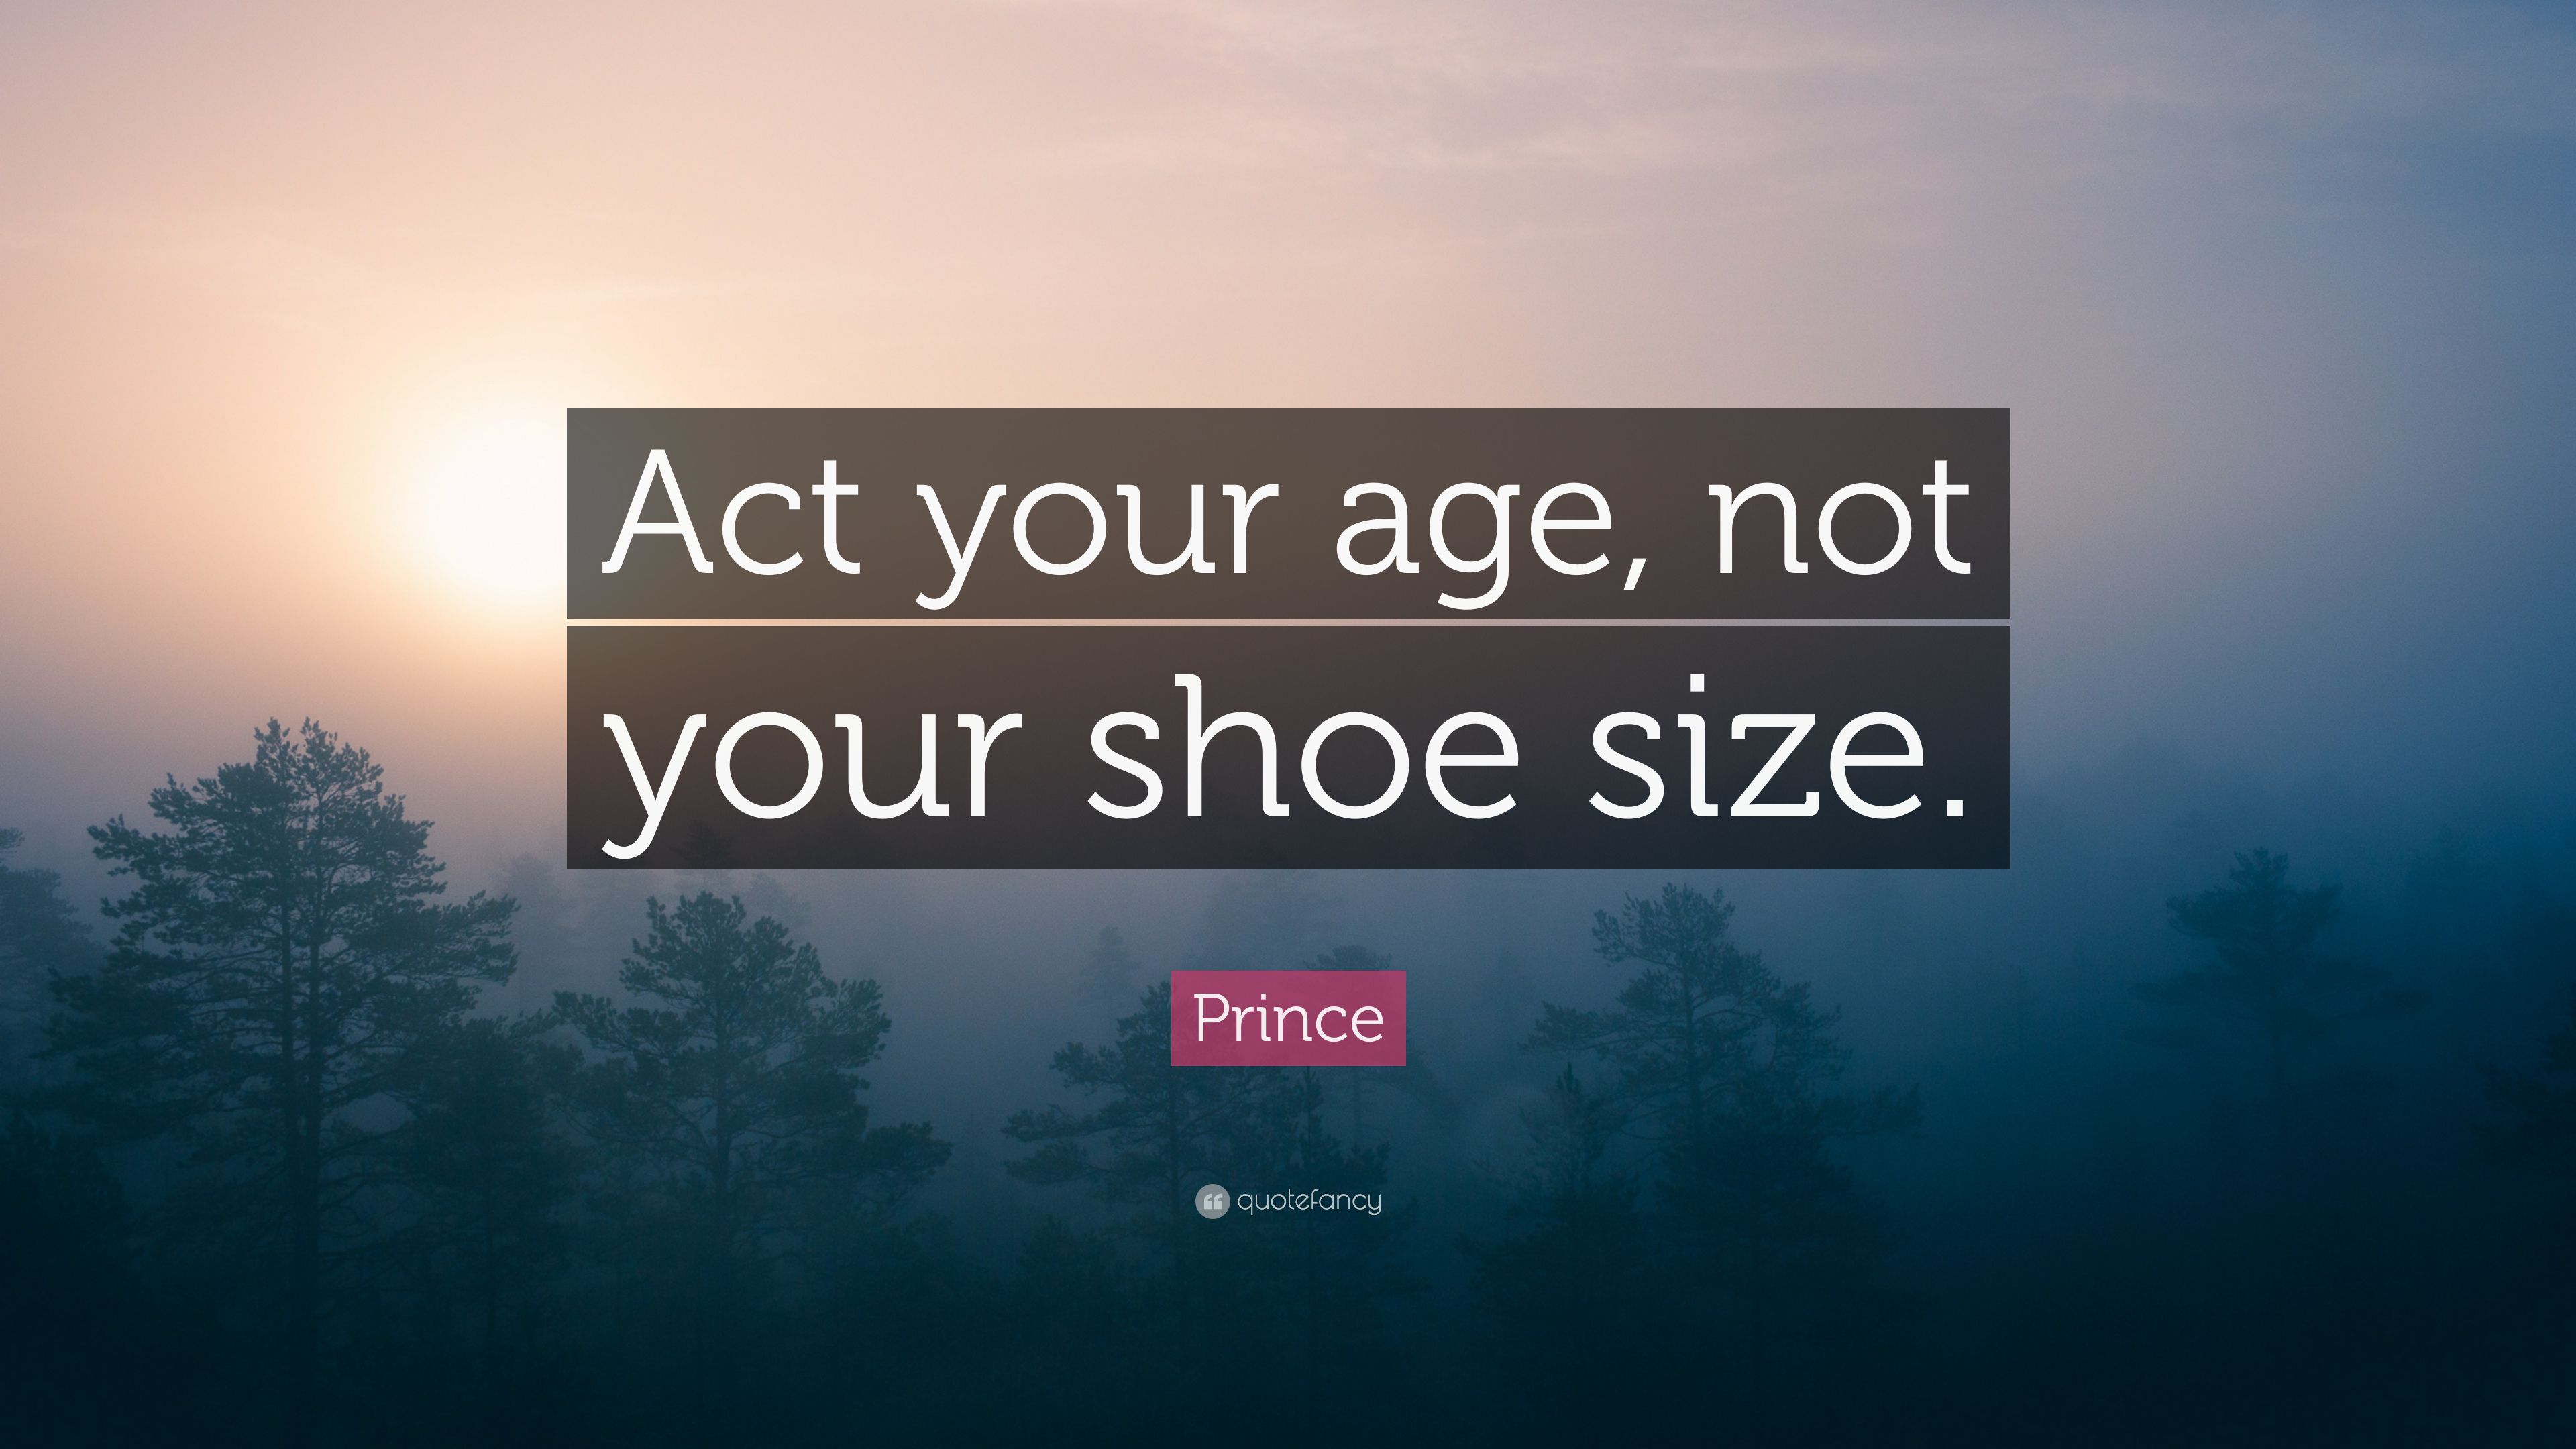 Prince Quote: “Act your age, not your shoe size.” 10 wallpaper